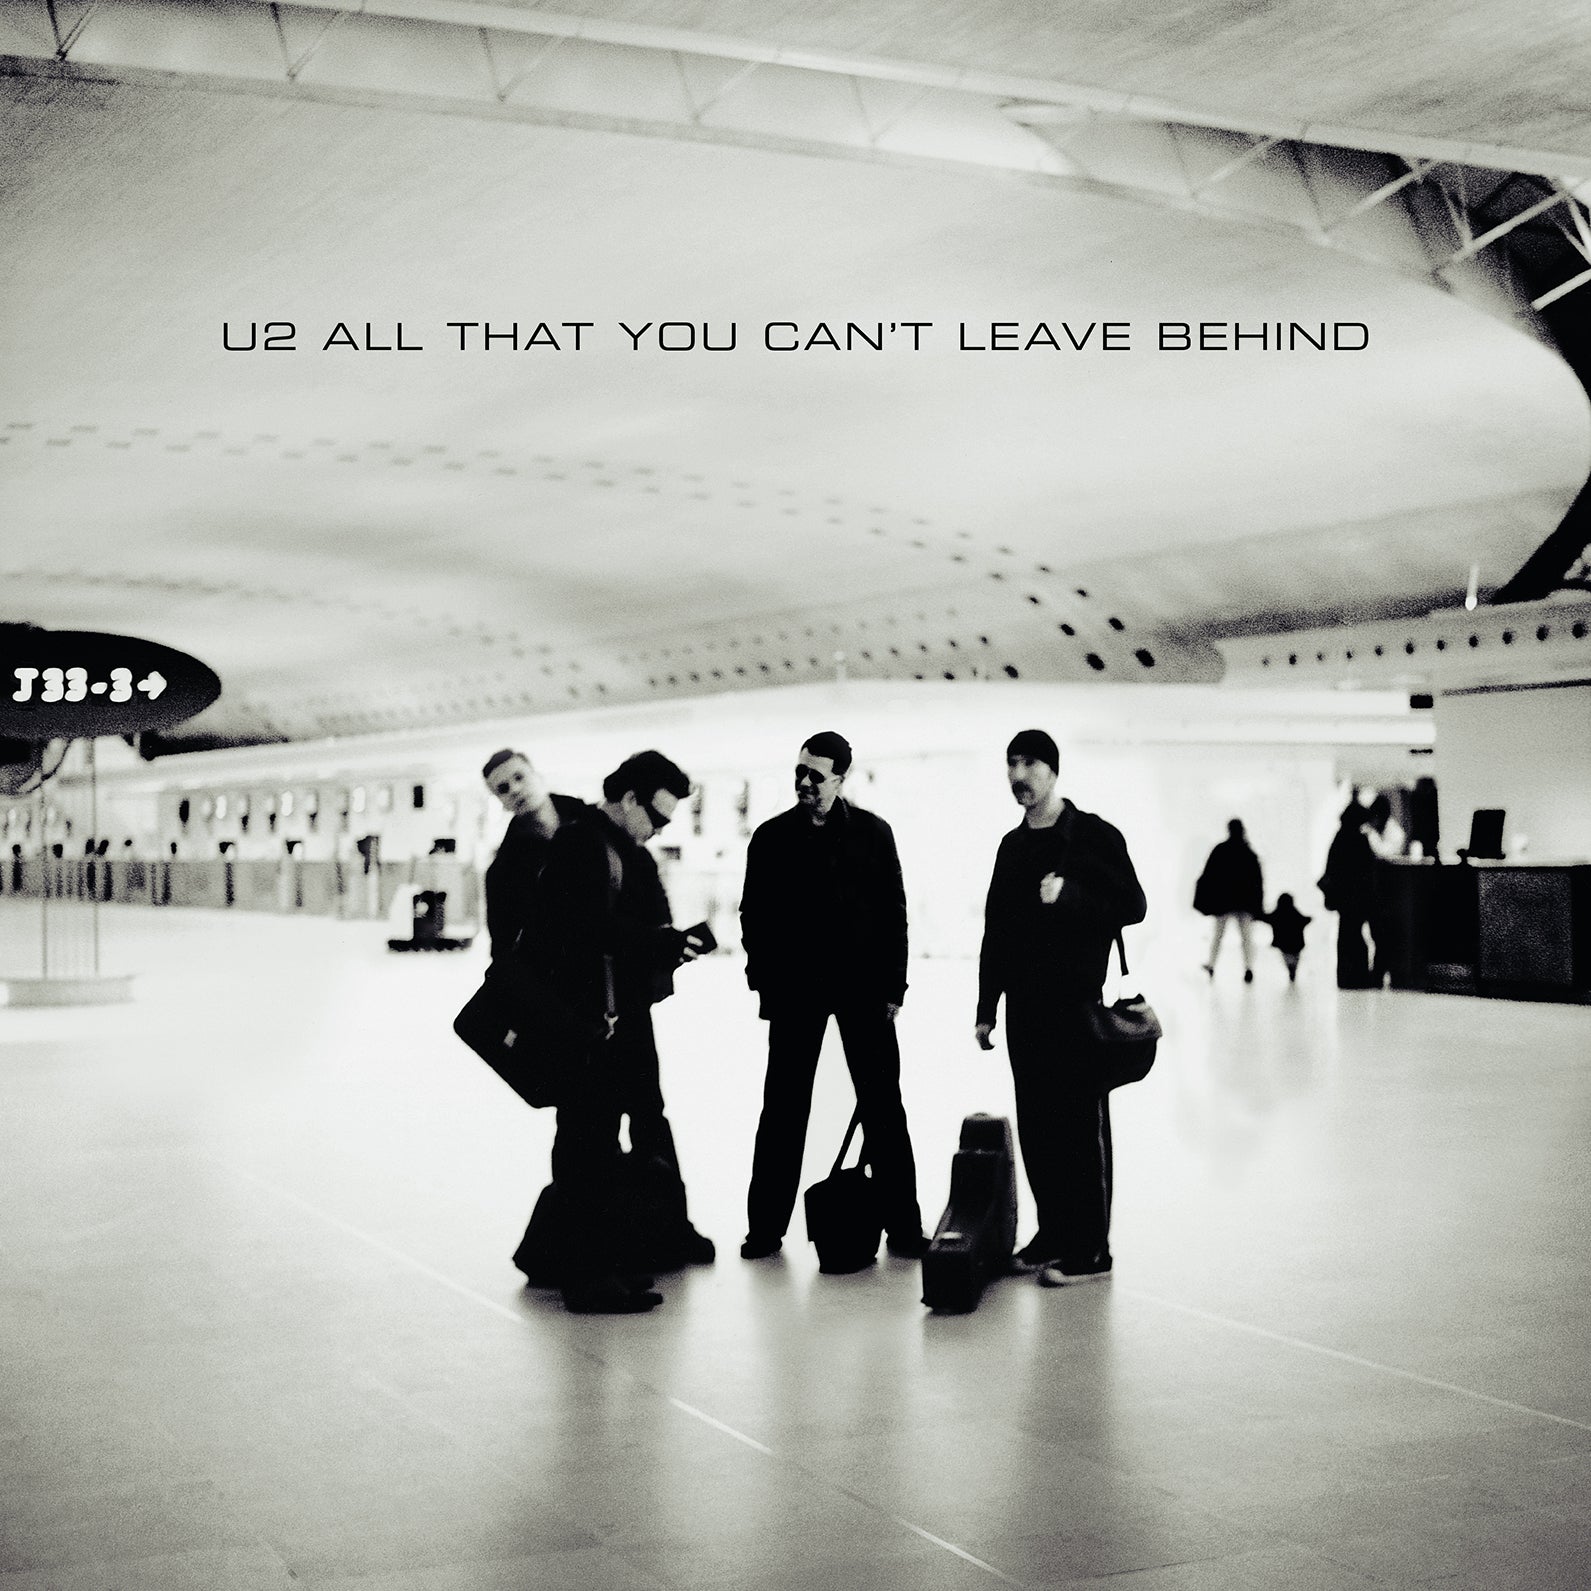 U2 - All That You Can't Leave Behind (20th Anniv. Ed.) - 2LP - 180g Vinyl